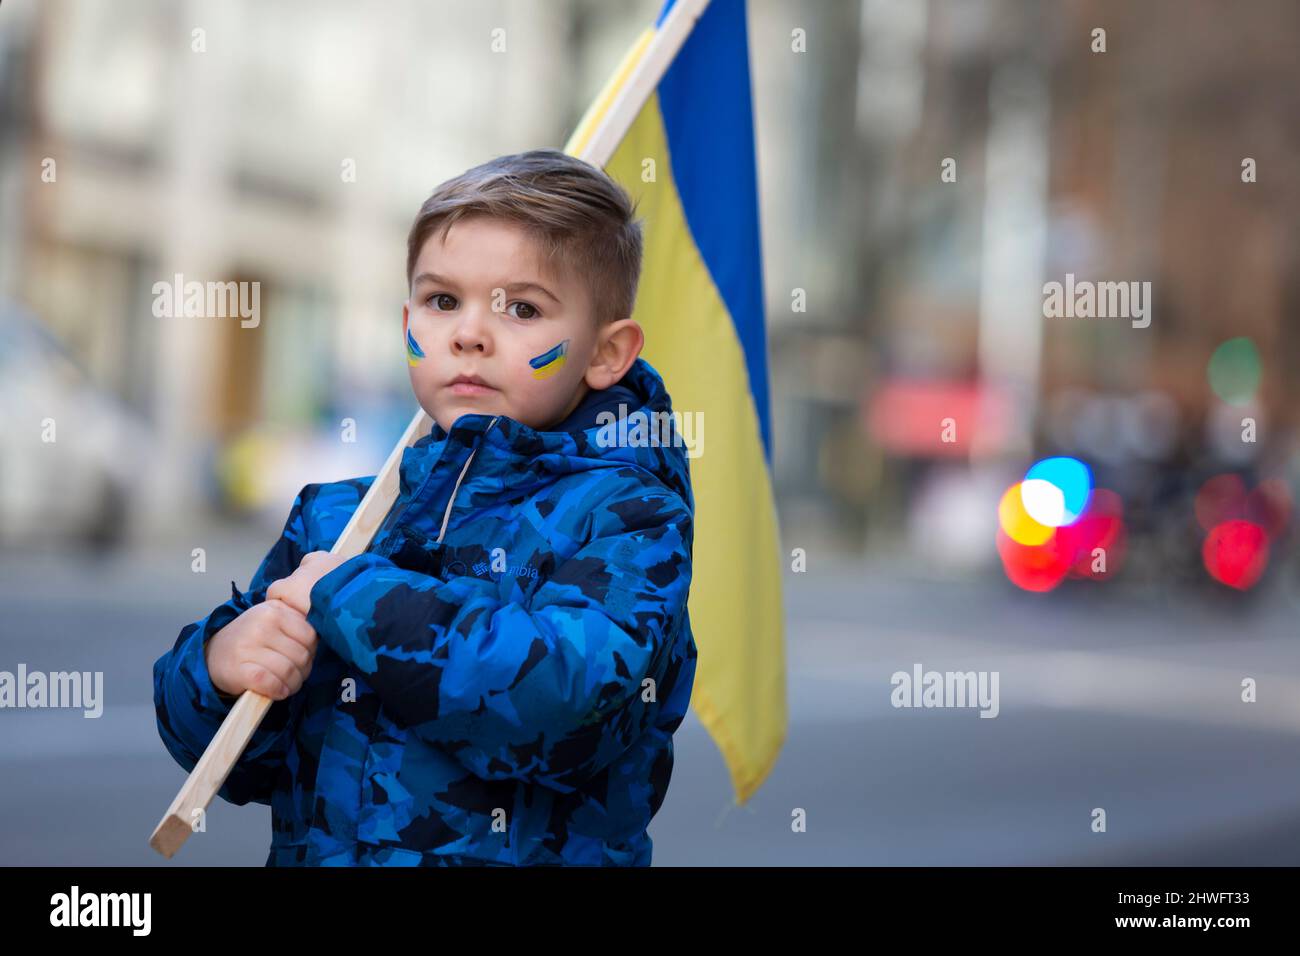 Seattle, Washington, USA. 5th March, 2022. A young boy hods a Ukrainian flag during a rally and march against the Russian invasion of Ukraine. Hundreds attended the “Ukrainian March and Rally In Seattle Against Russian War” event that was organized by the Ukrainian Association of Washington State. Credit: Paul Christian Gordon/Alamy Live News Stock Photo